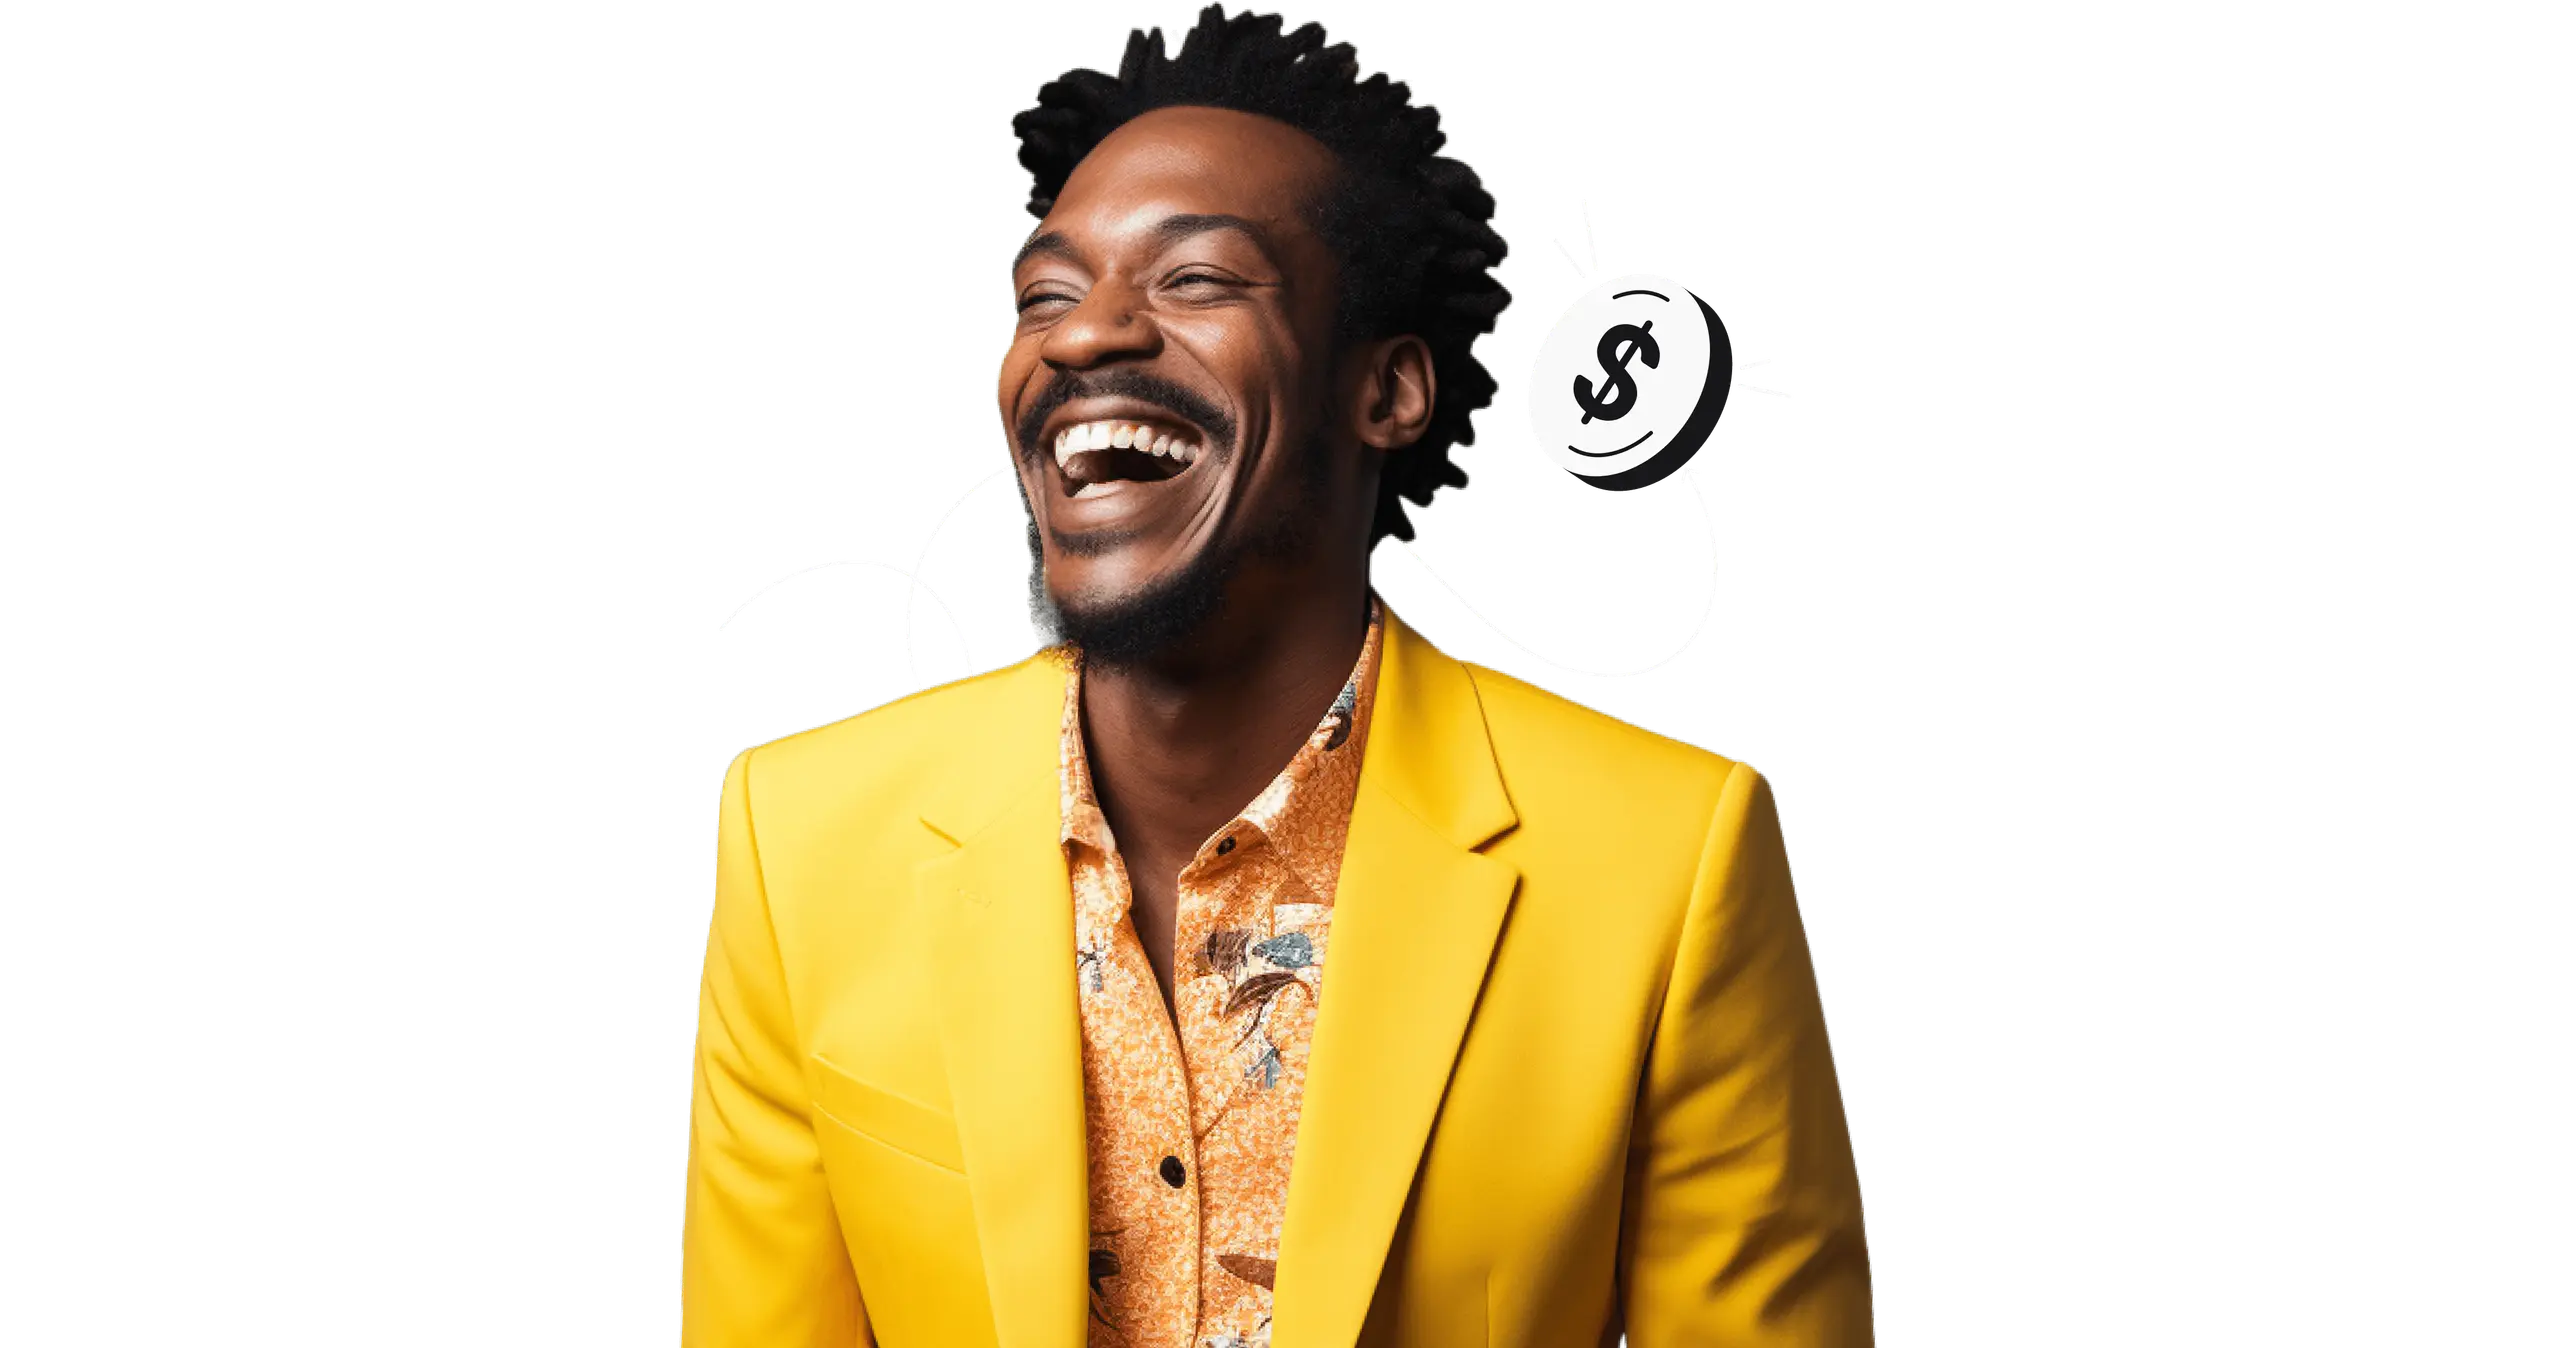 A laughing man in a yellow jacket.